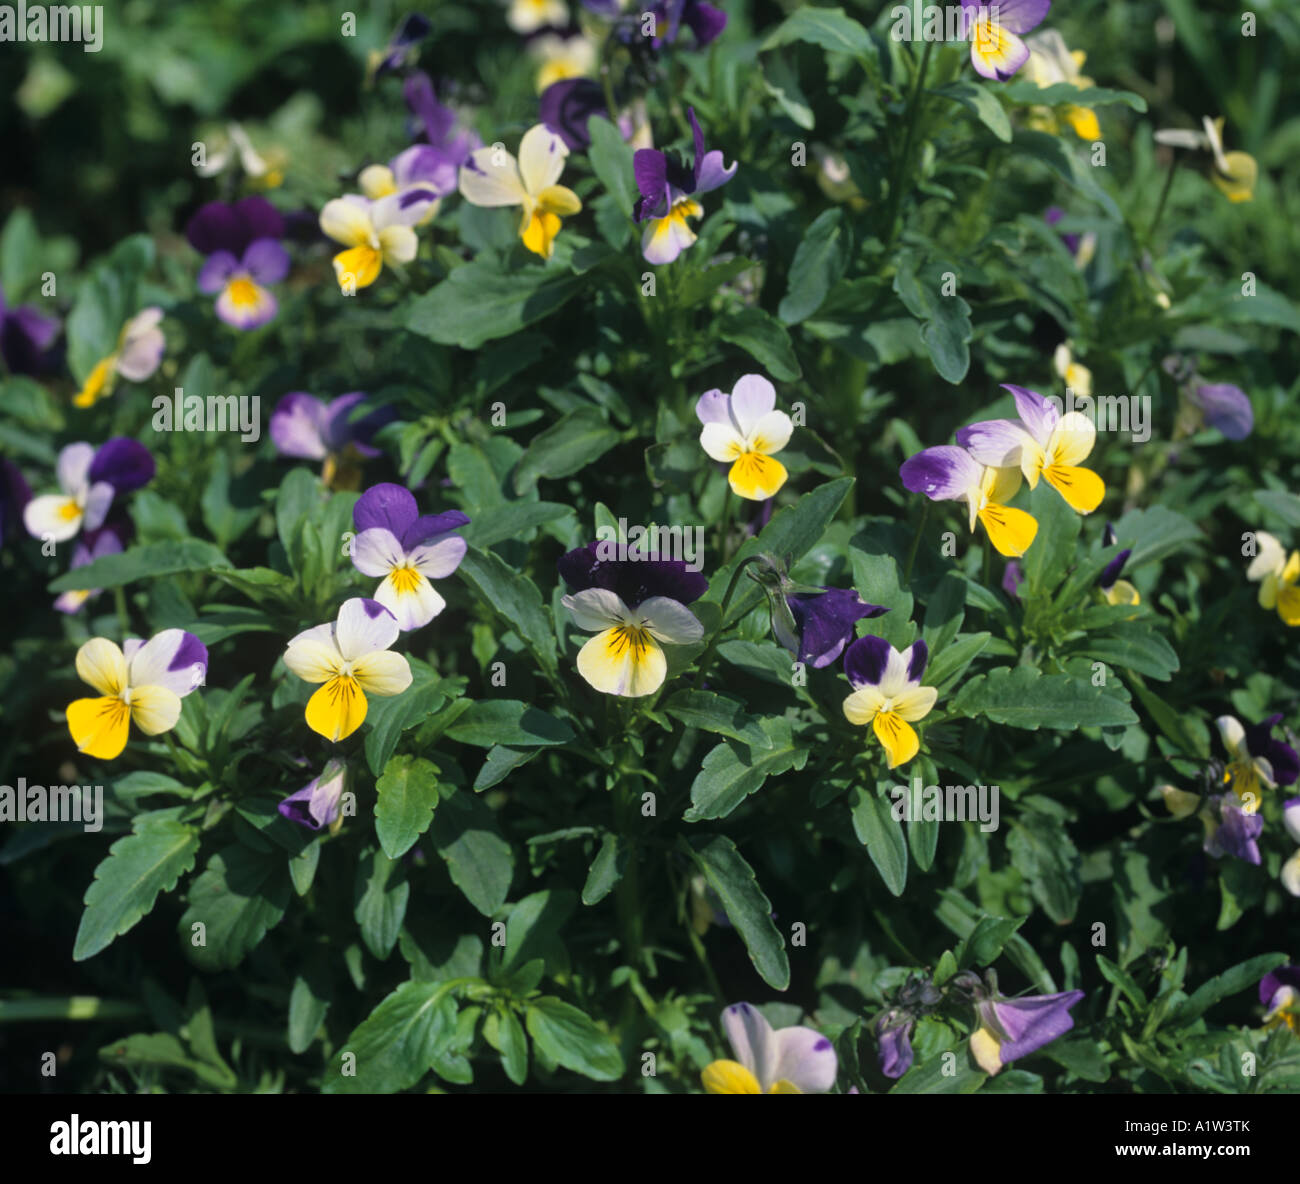 Heartsease johnny jumpup or wild pansy Viola tricolor flowering plants Stock Photo